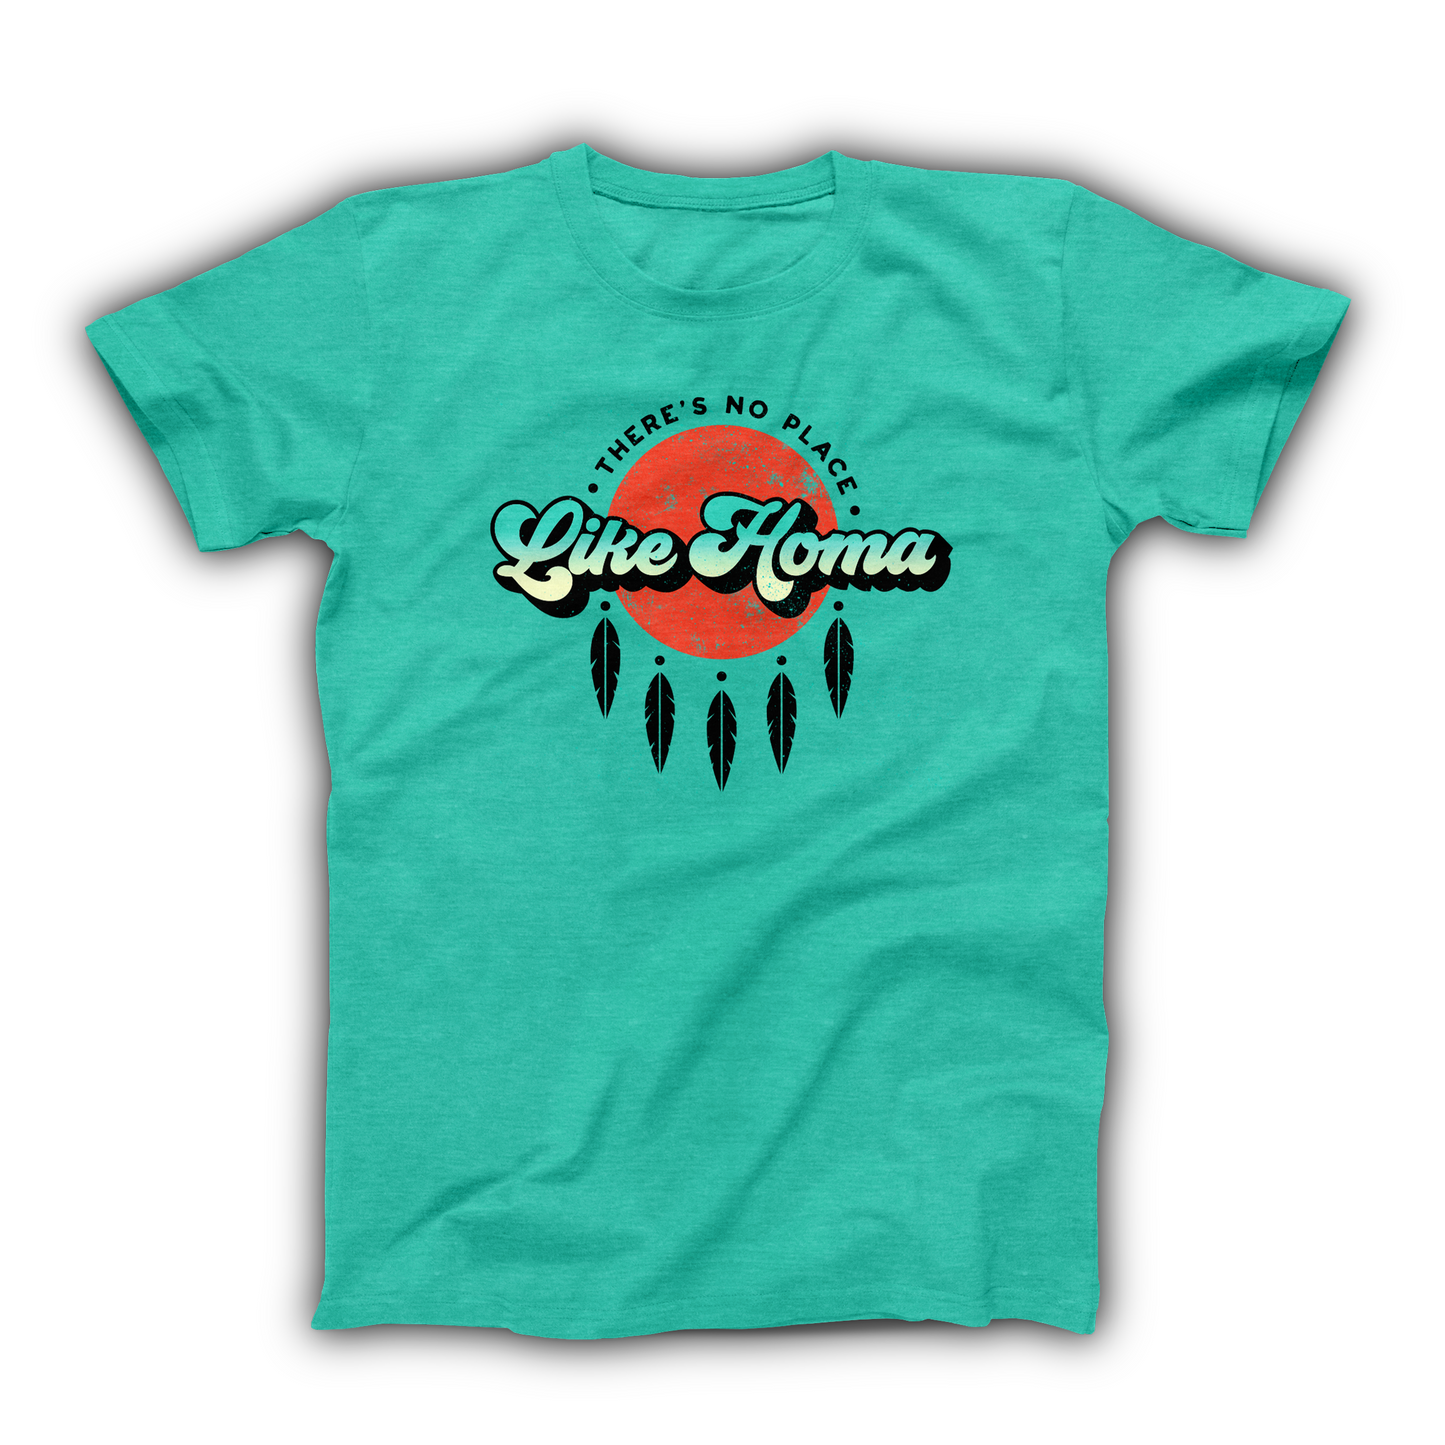 Heather Sea Green colored Oklahoma T-shirt. Screen printed in white, black and red across the chest. The background of the design is a distressed red sun with 5 black feathers hanging from the bottom like a dream catcher. At the top of the design in a half circle around the sun is "There's No Place" in small black font. And across the middle of the design in large white/teal gradient is "Like Homa"